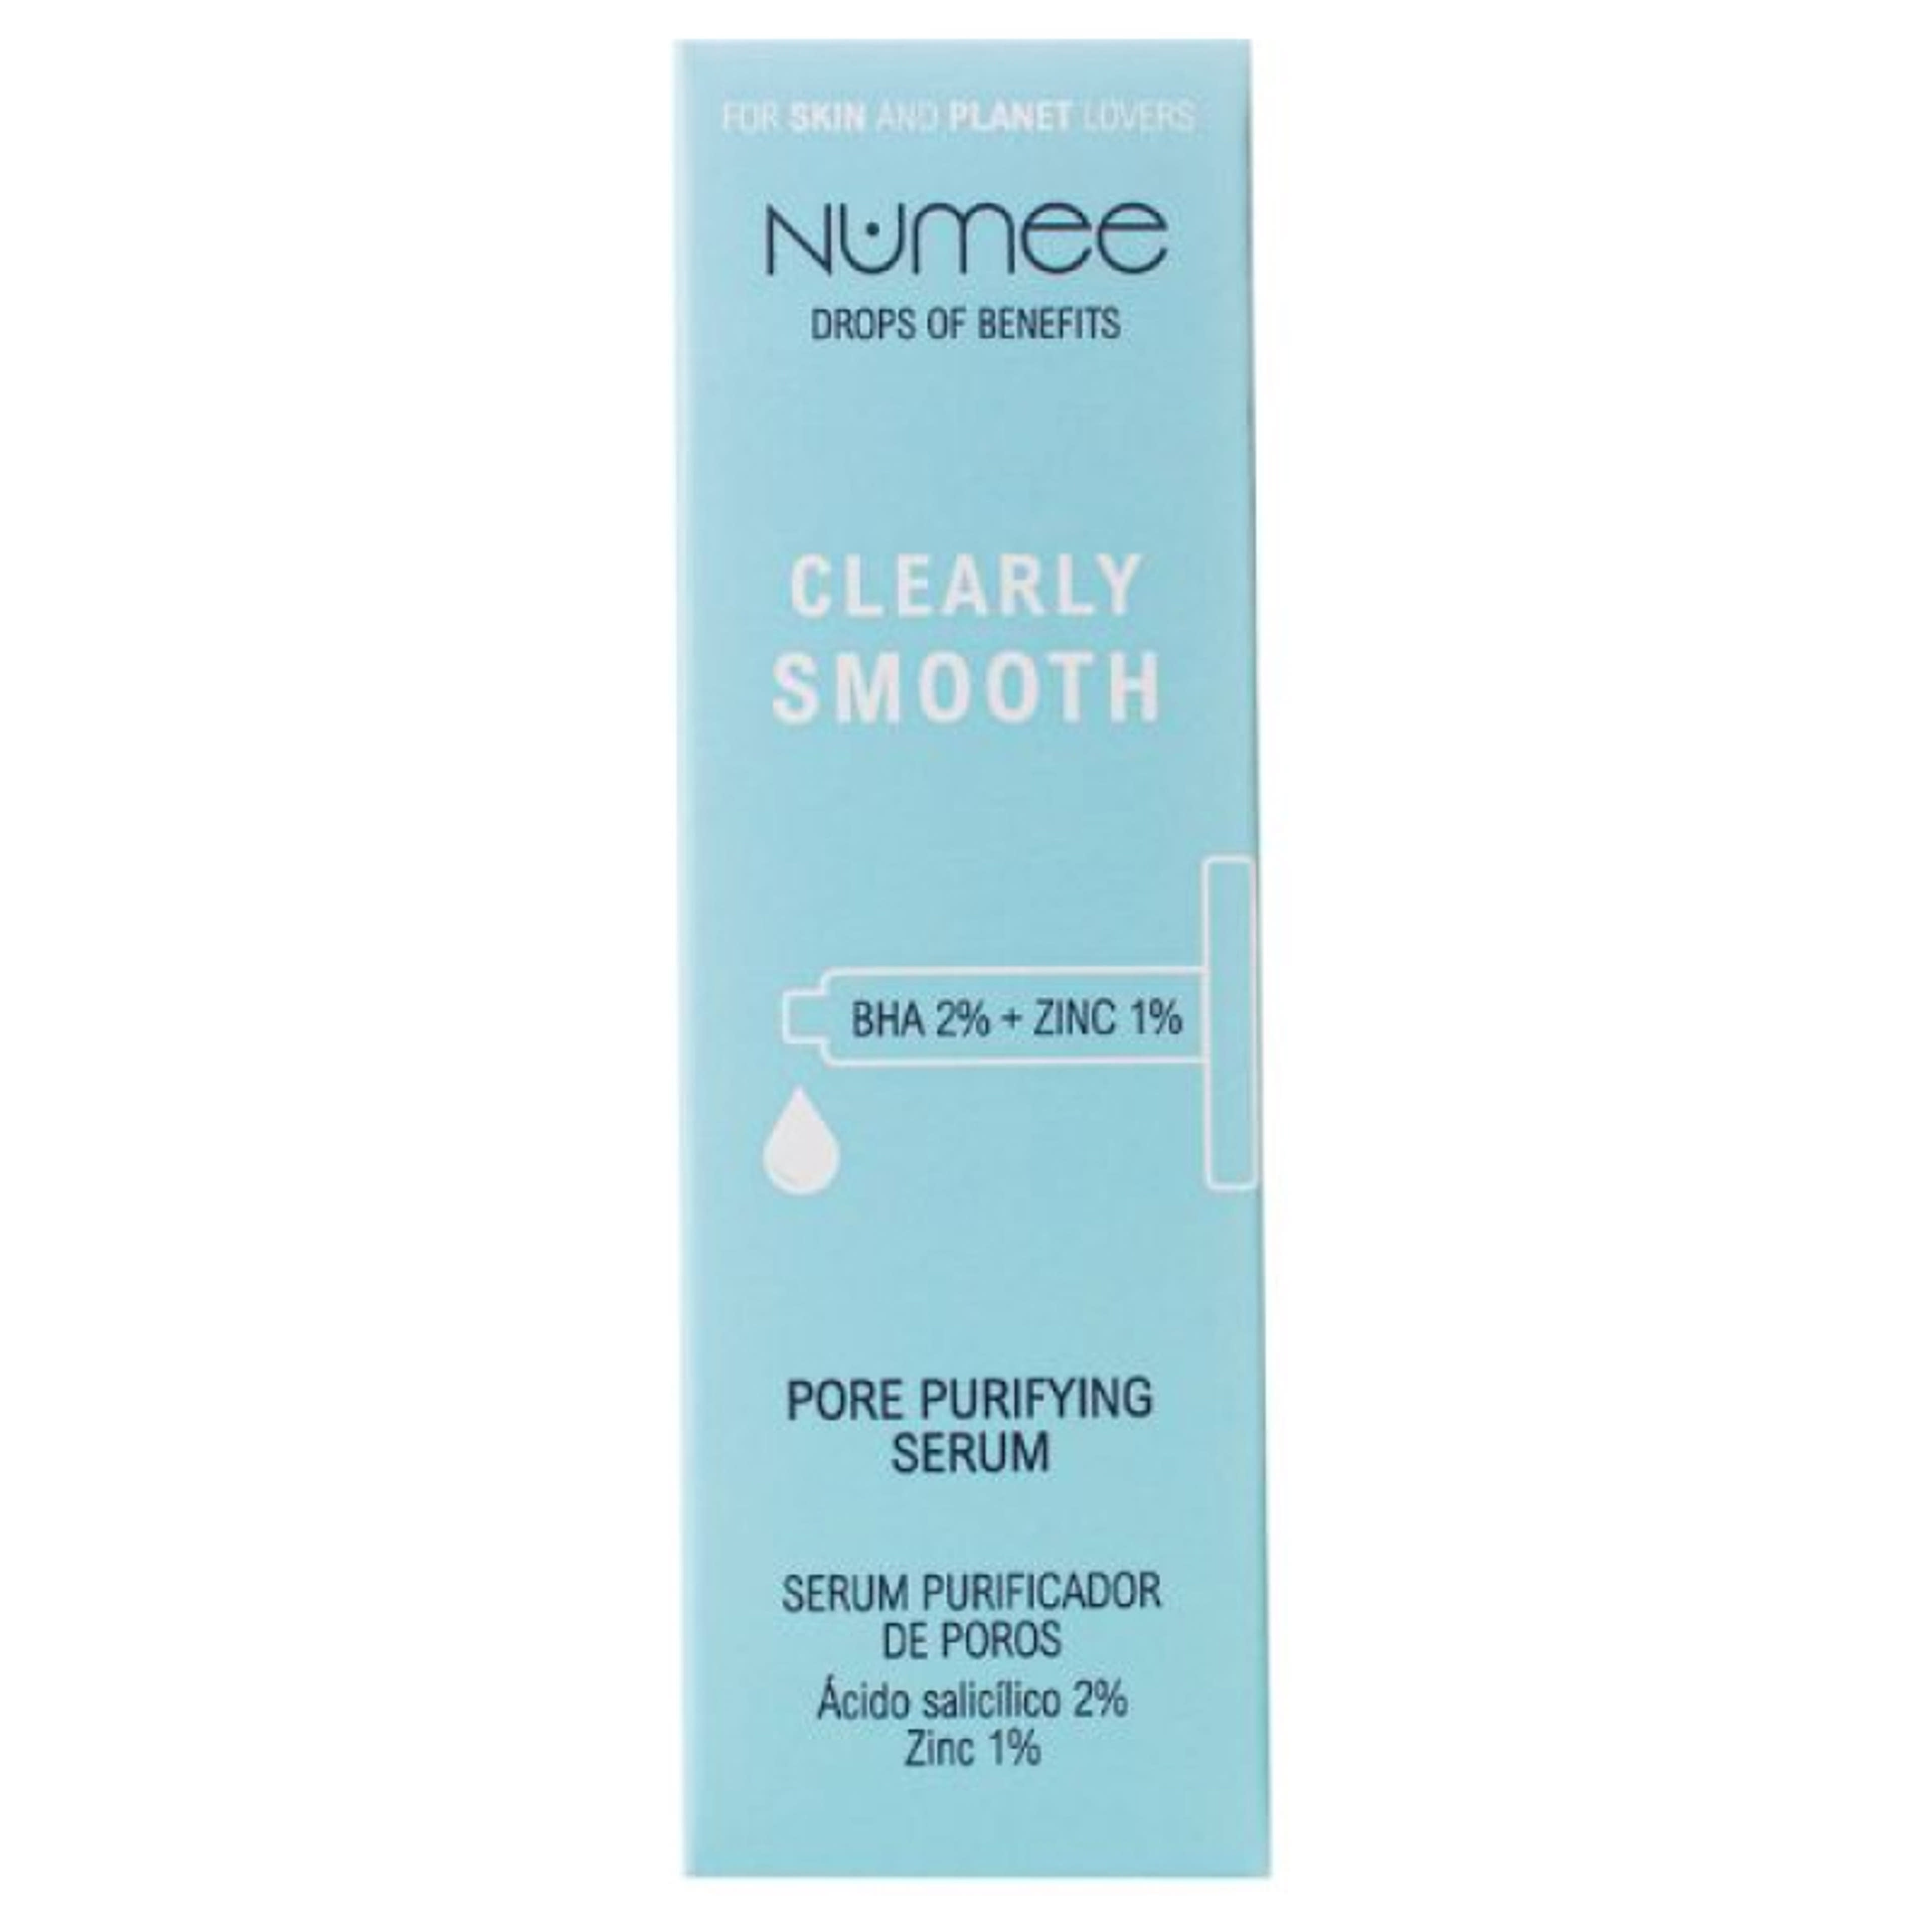 Numee Drops of Benefits Clearly Smooth Salicylic Acid szérum - 30 ml-2